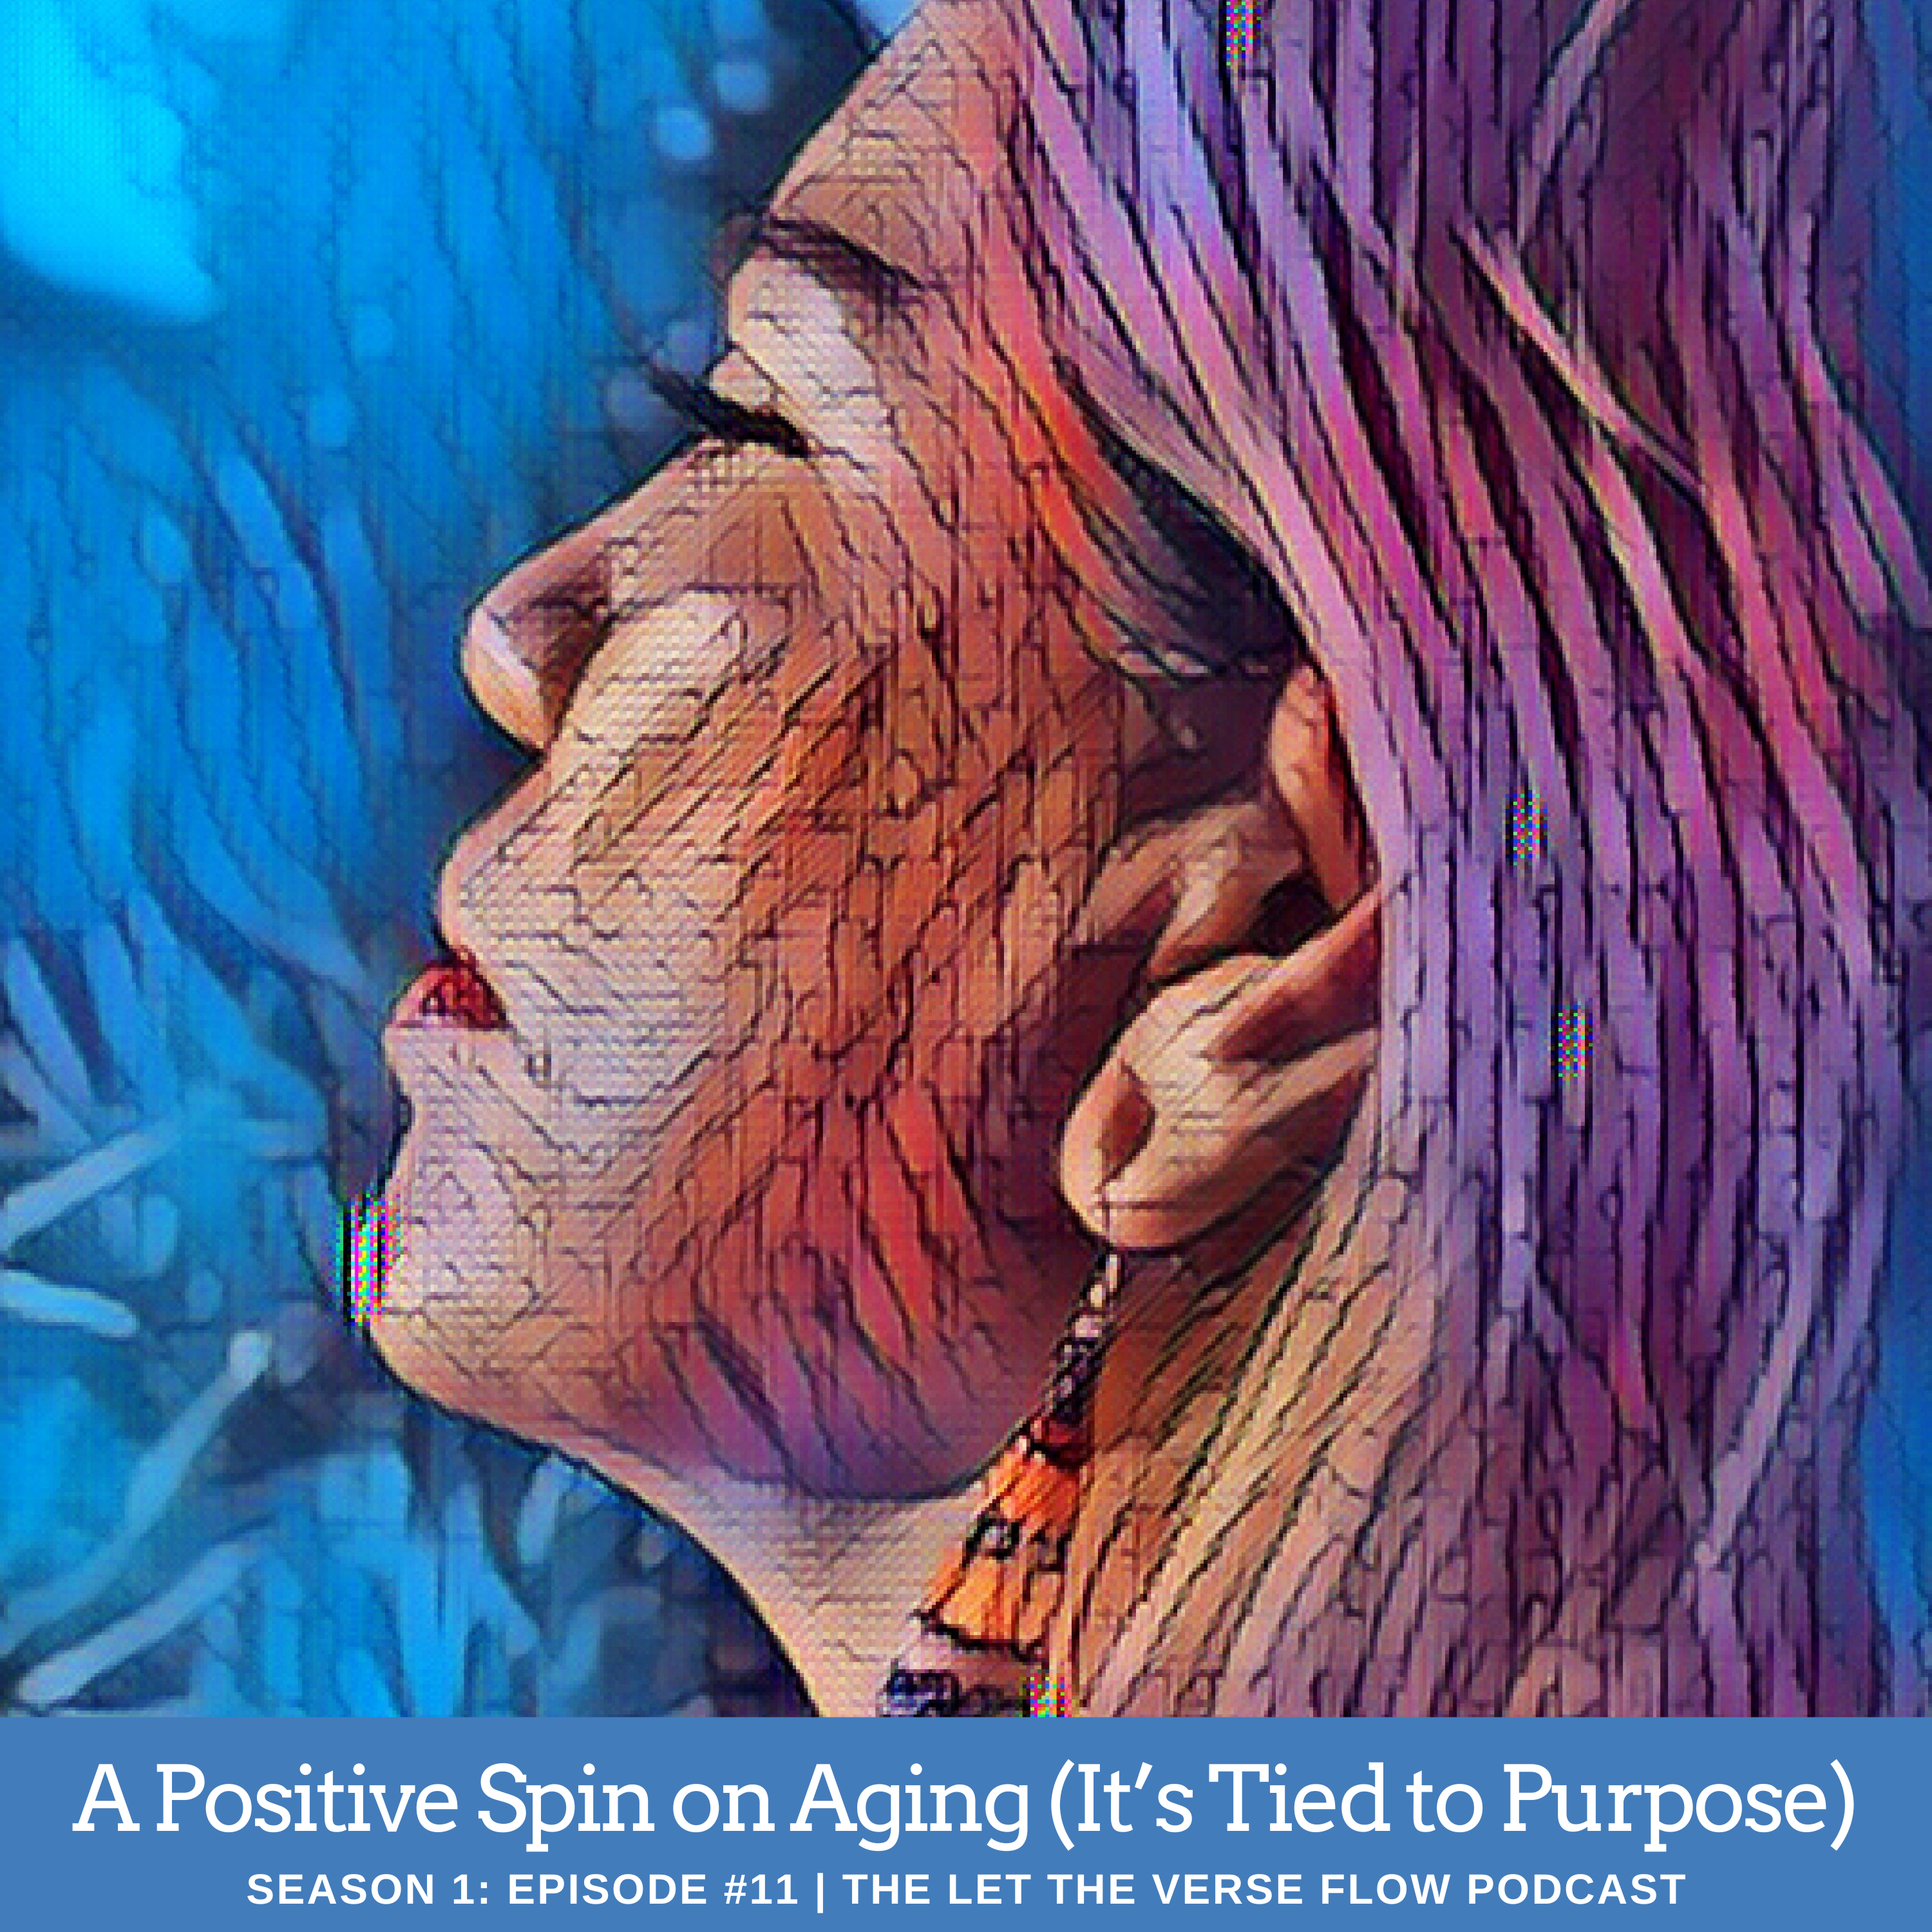 A picture of a woman looking up; the text reads: "A positive spin on aging, it's tied to purpose season 1 episode #11 the Let the Verse Flow podcast"